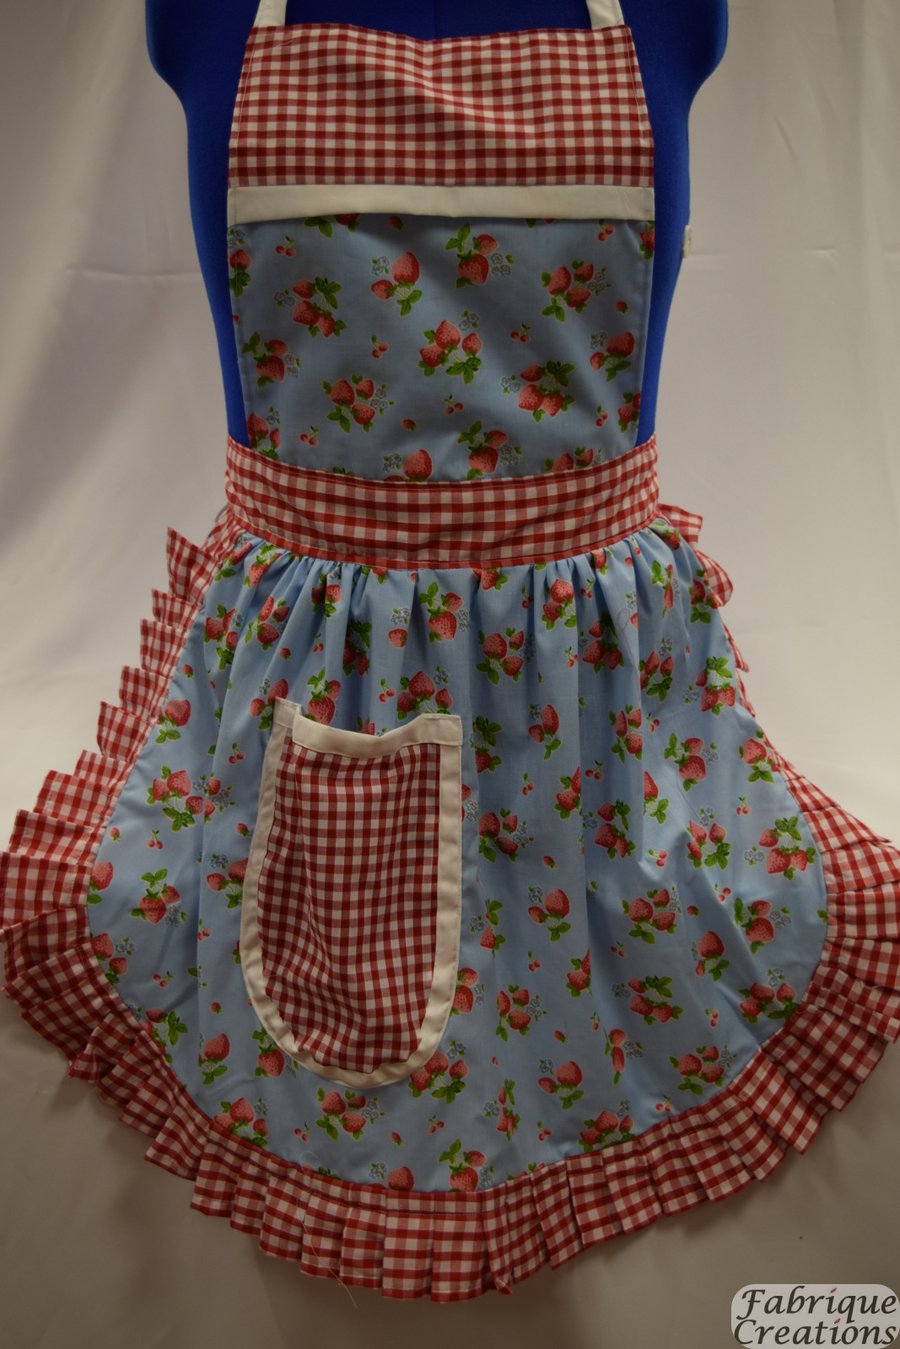 Vintage 50s Style Full Apron Pinny - Sky Blue with Strawberries with Gingham Tri